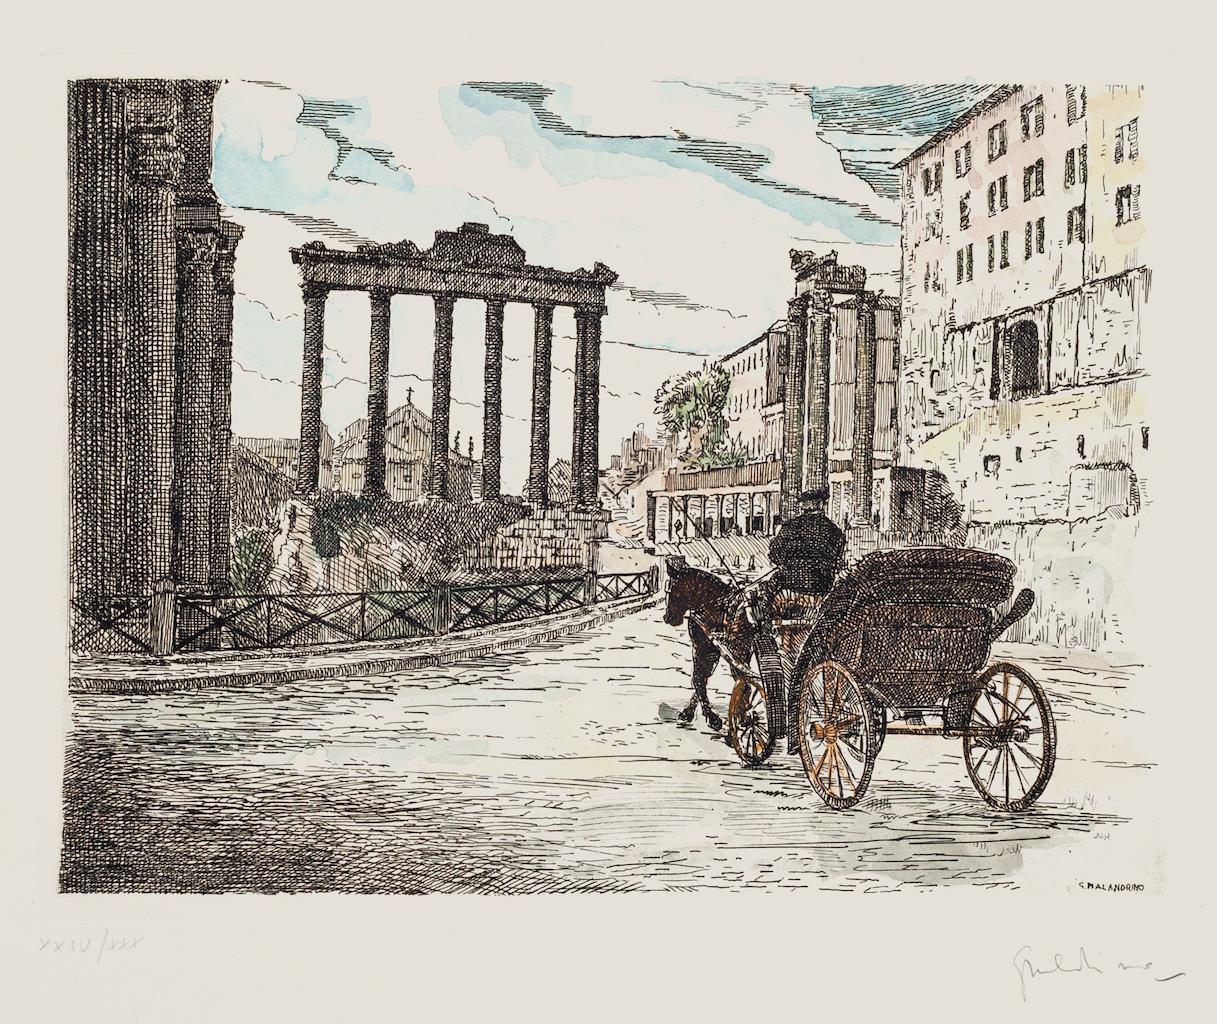 Roman Landscape is an original etching artwork realized by the Italian artist Giuseppe Malandrino.

hand-signed by the artist on the lower right in pencil.

Numbered in Roman numerals, edition o XXIV/XXX prints.

Perfect conditions. 

Passepartout